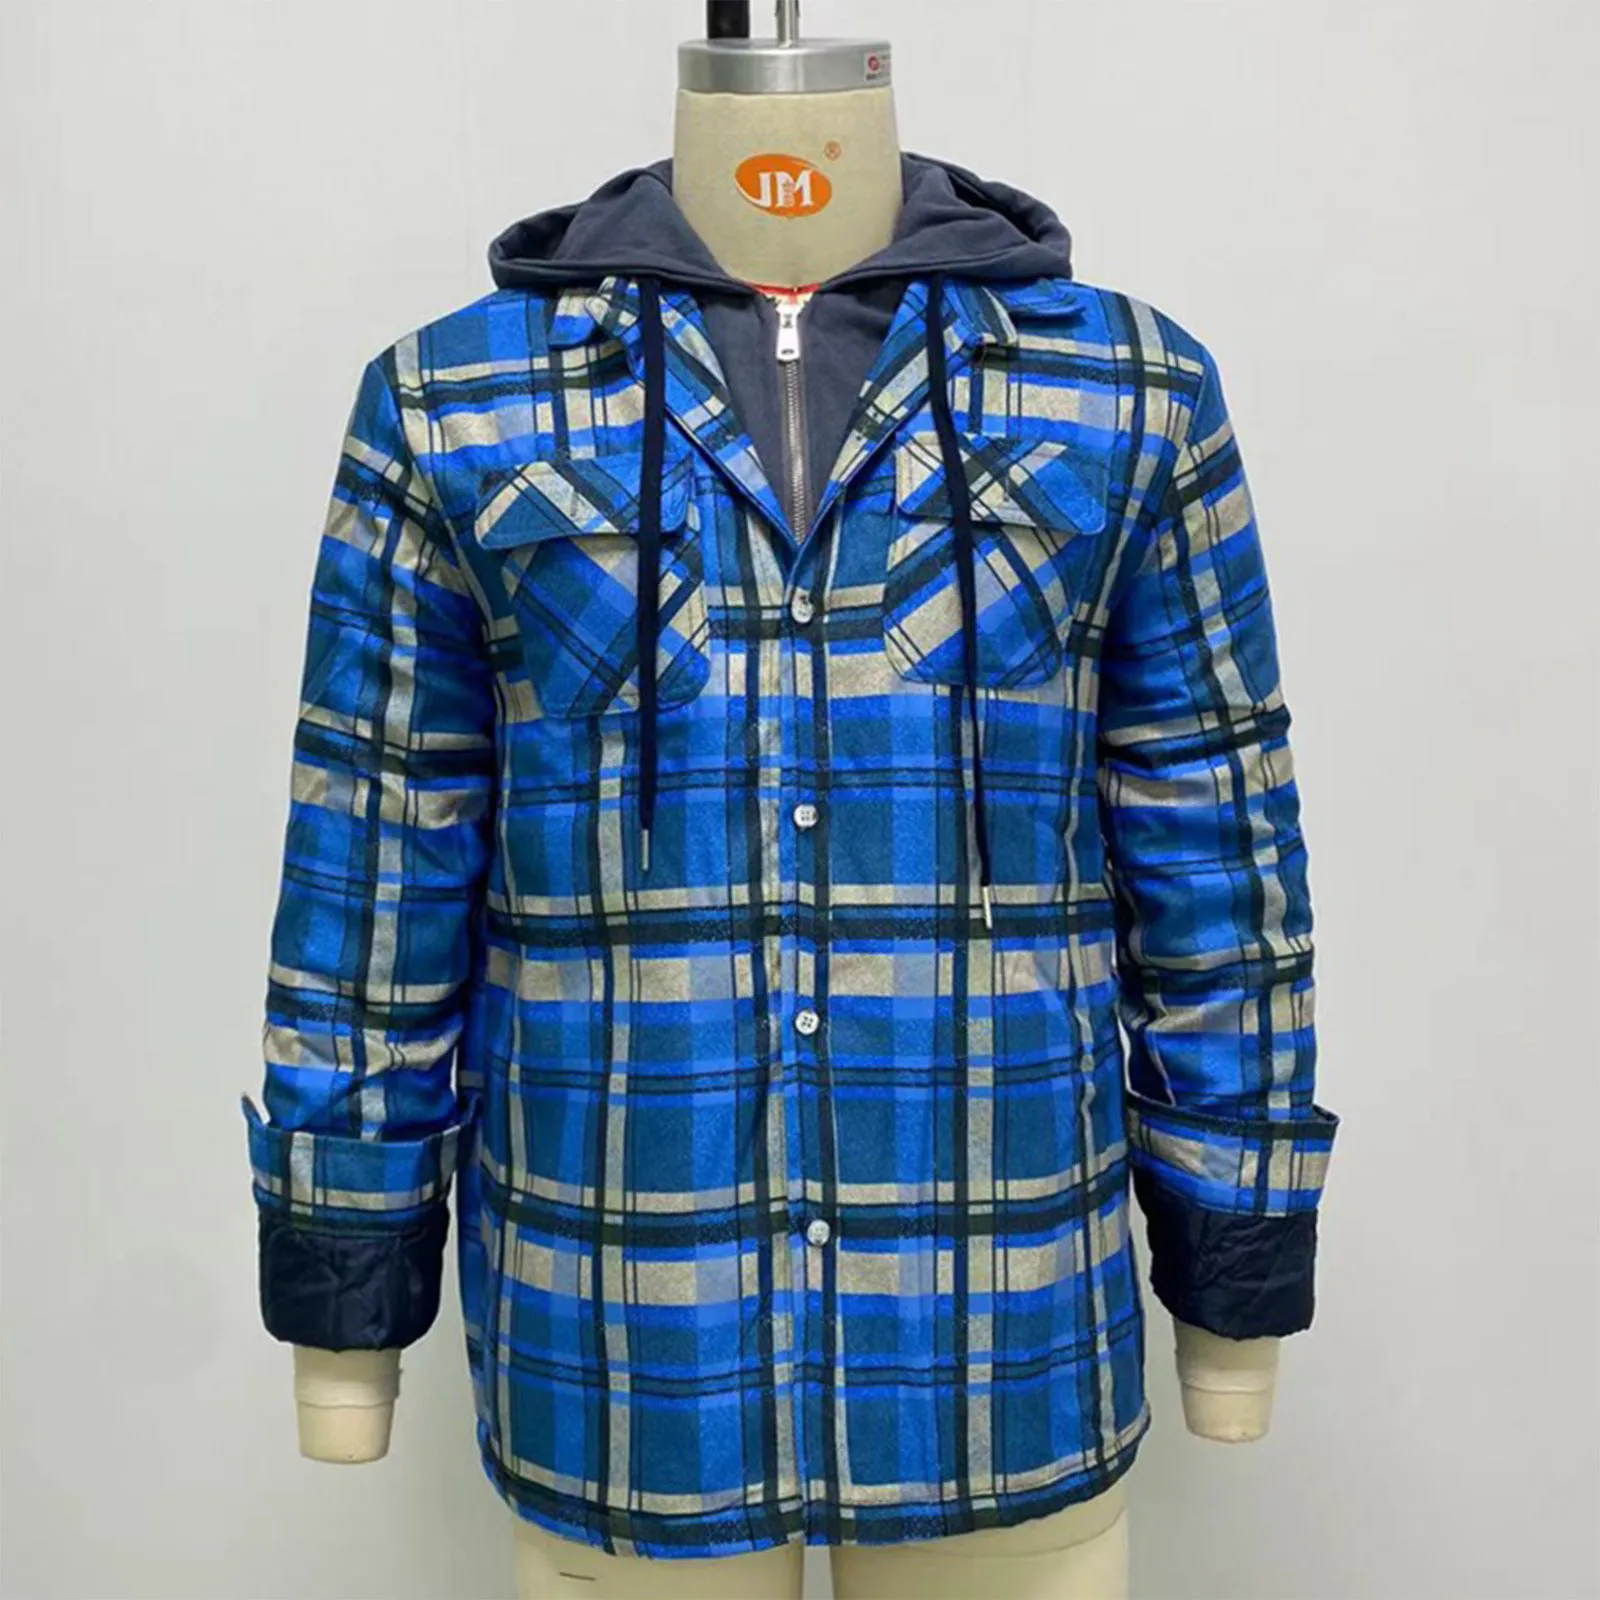 

Men's Jackets Fashion Outerwear Quilted Lined Button Down Plaid Shirt Add Velvet To Keep Warm Jacket With Hood Vintage Clothing